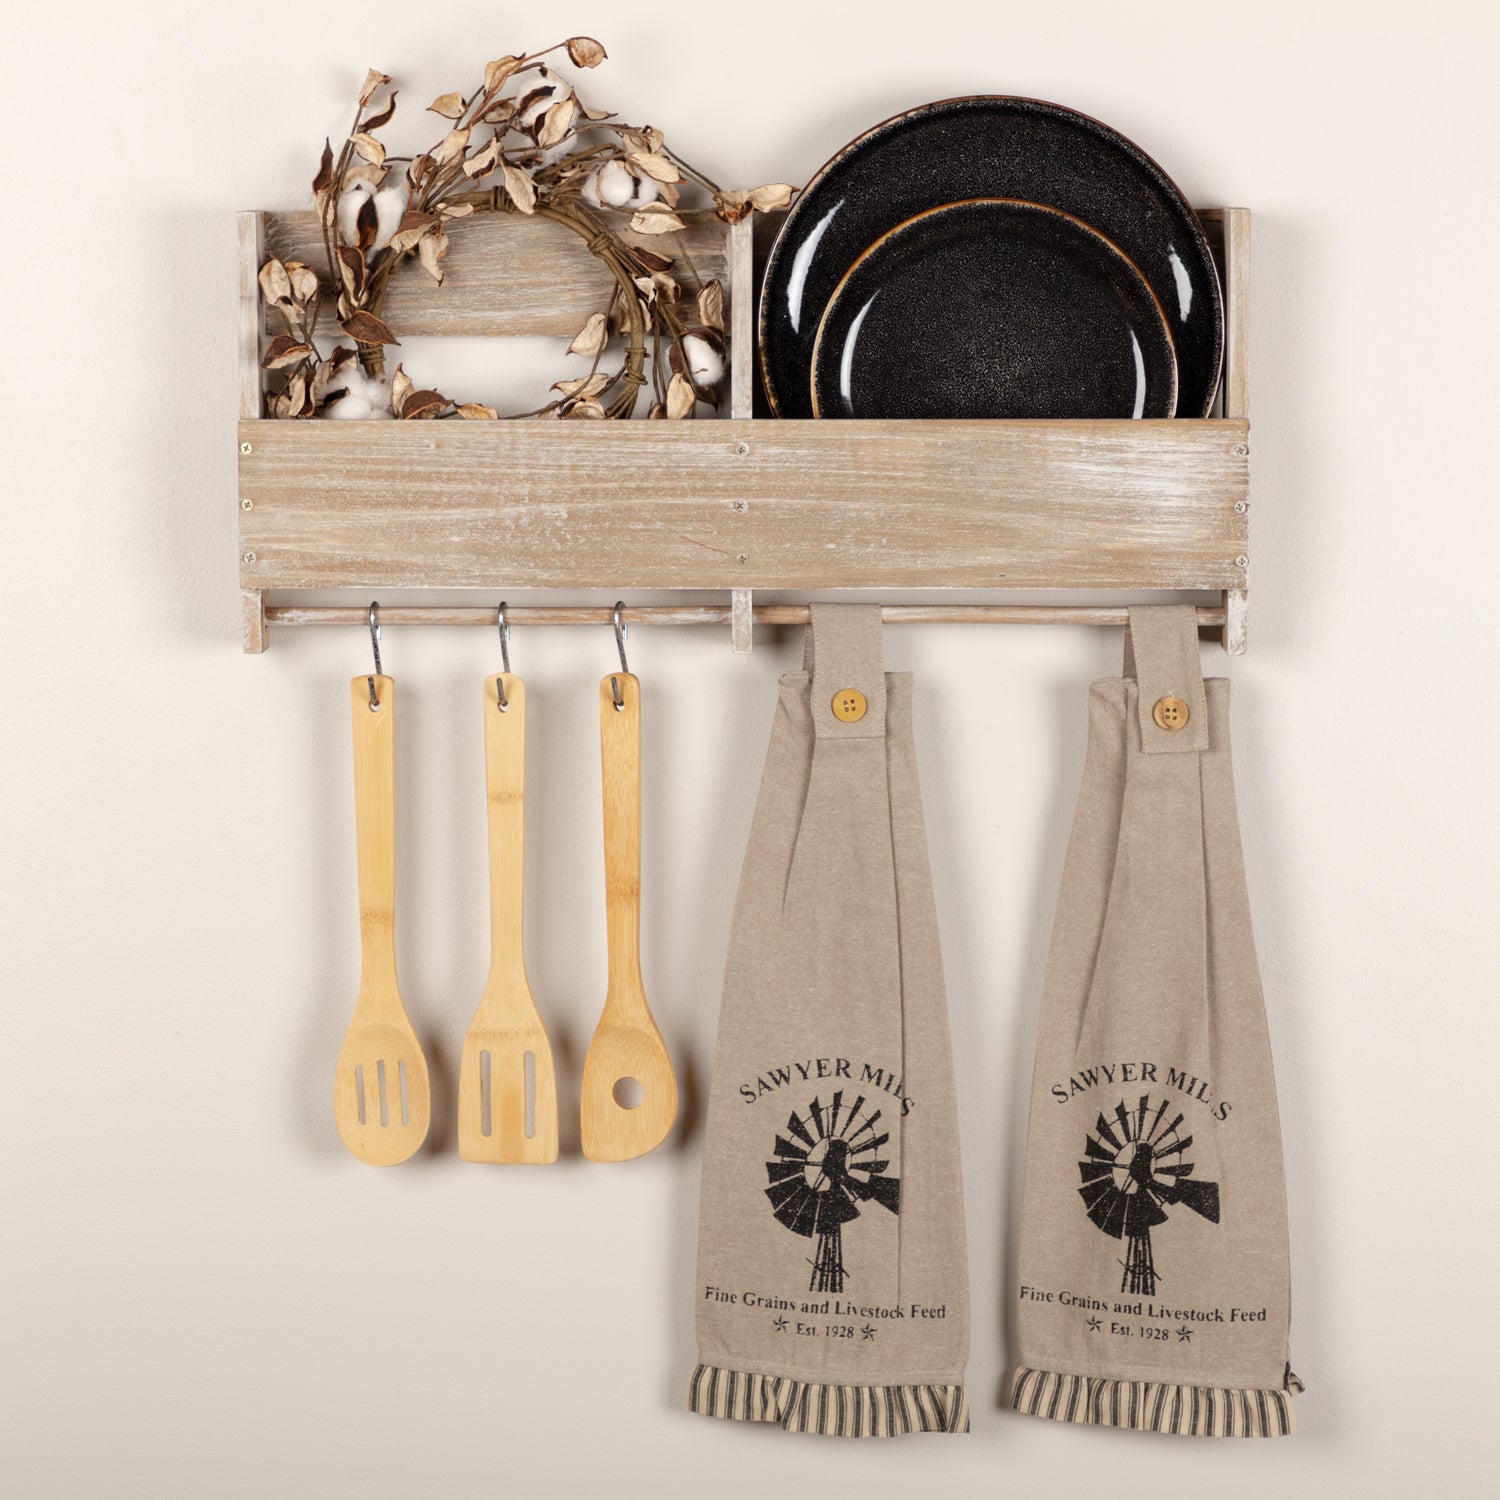 April & Olive Sawyer Mill Charcoal Windmill Button Loop Kitchen Towel Set of 2 By VHC Brands